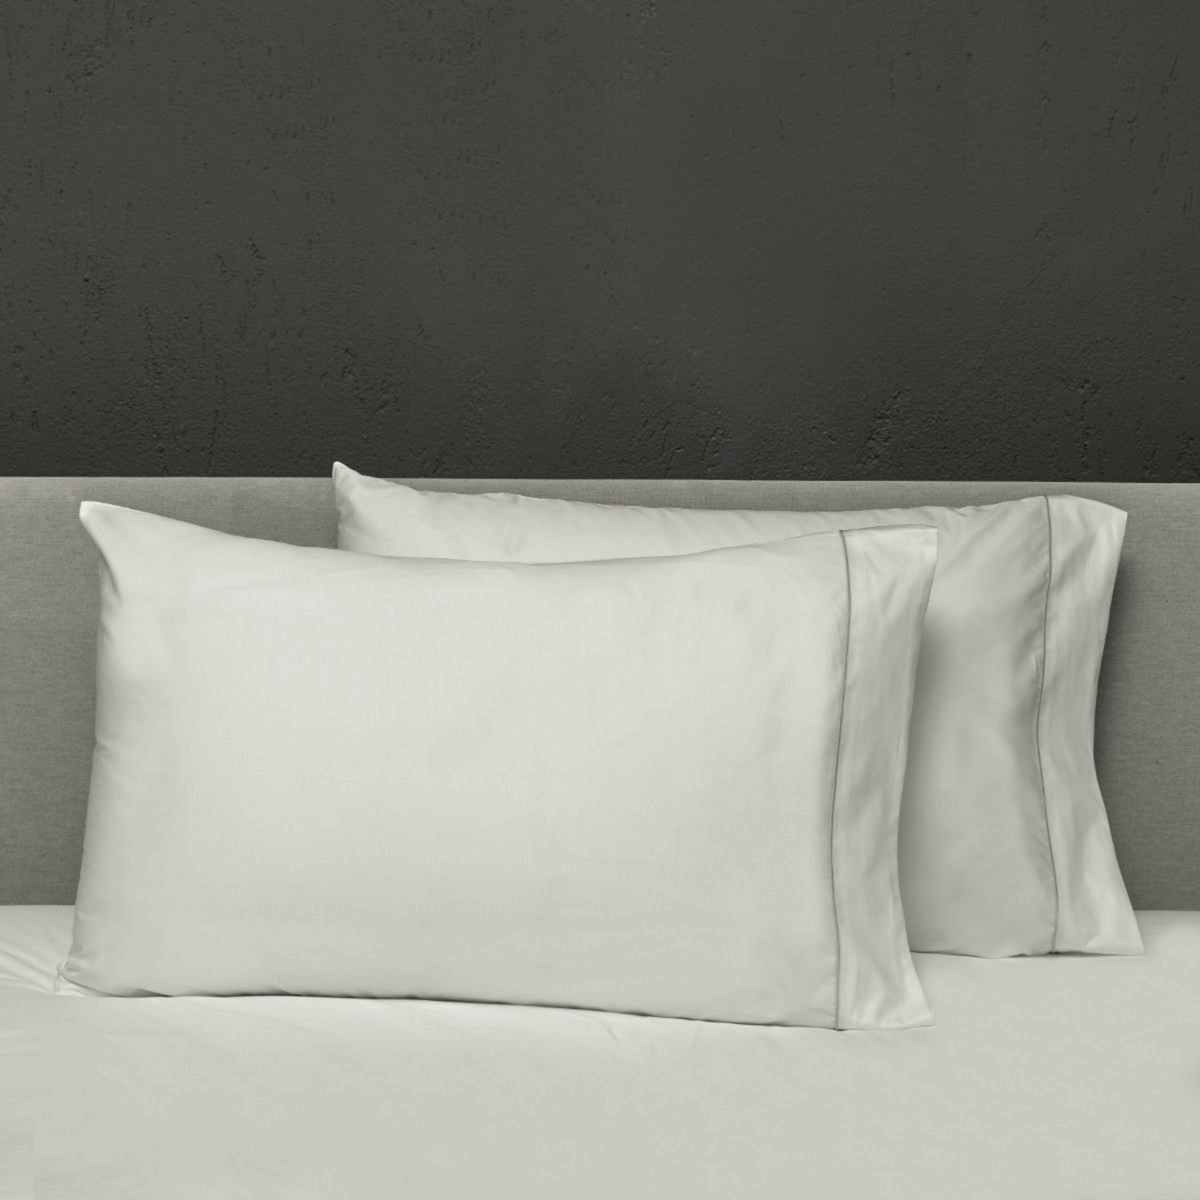 Pair of Pillowcases of Signoria Luce Bedding in Ivory Color